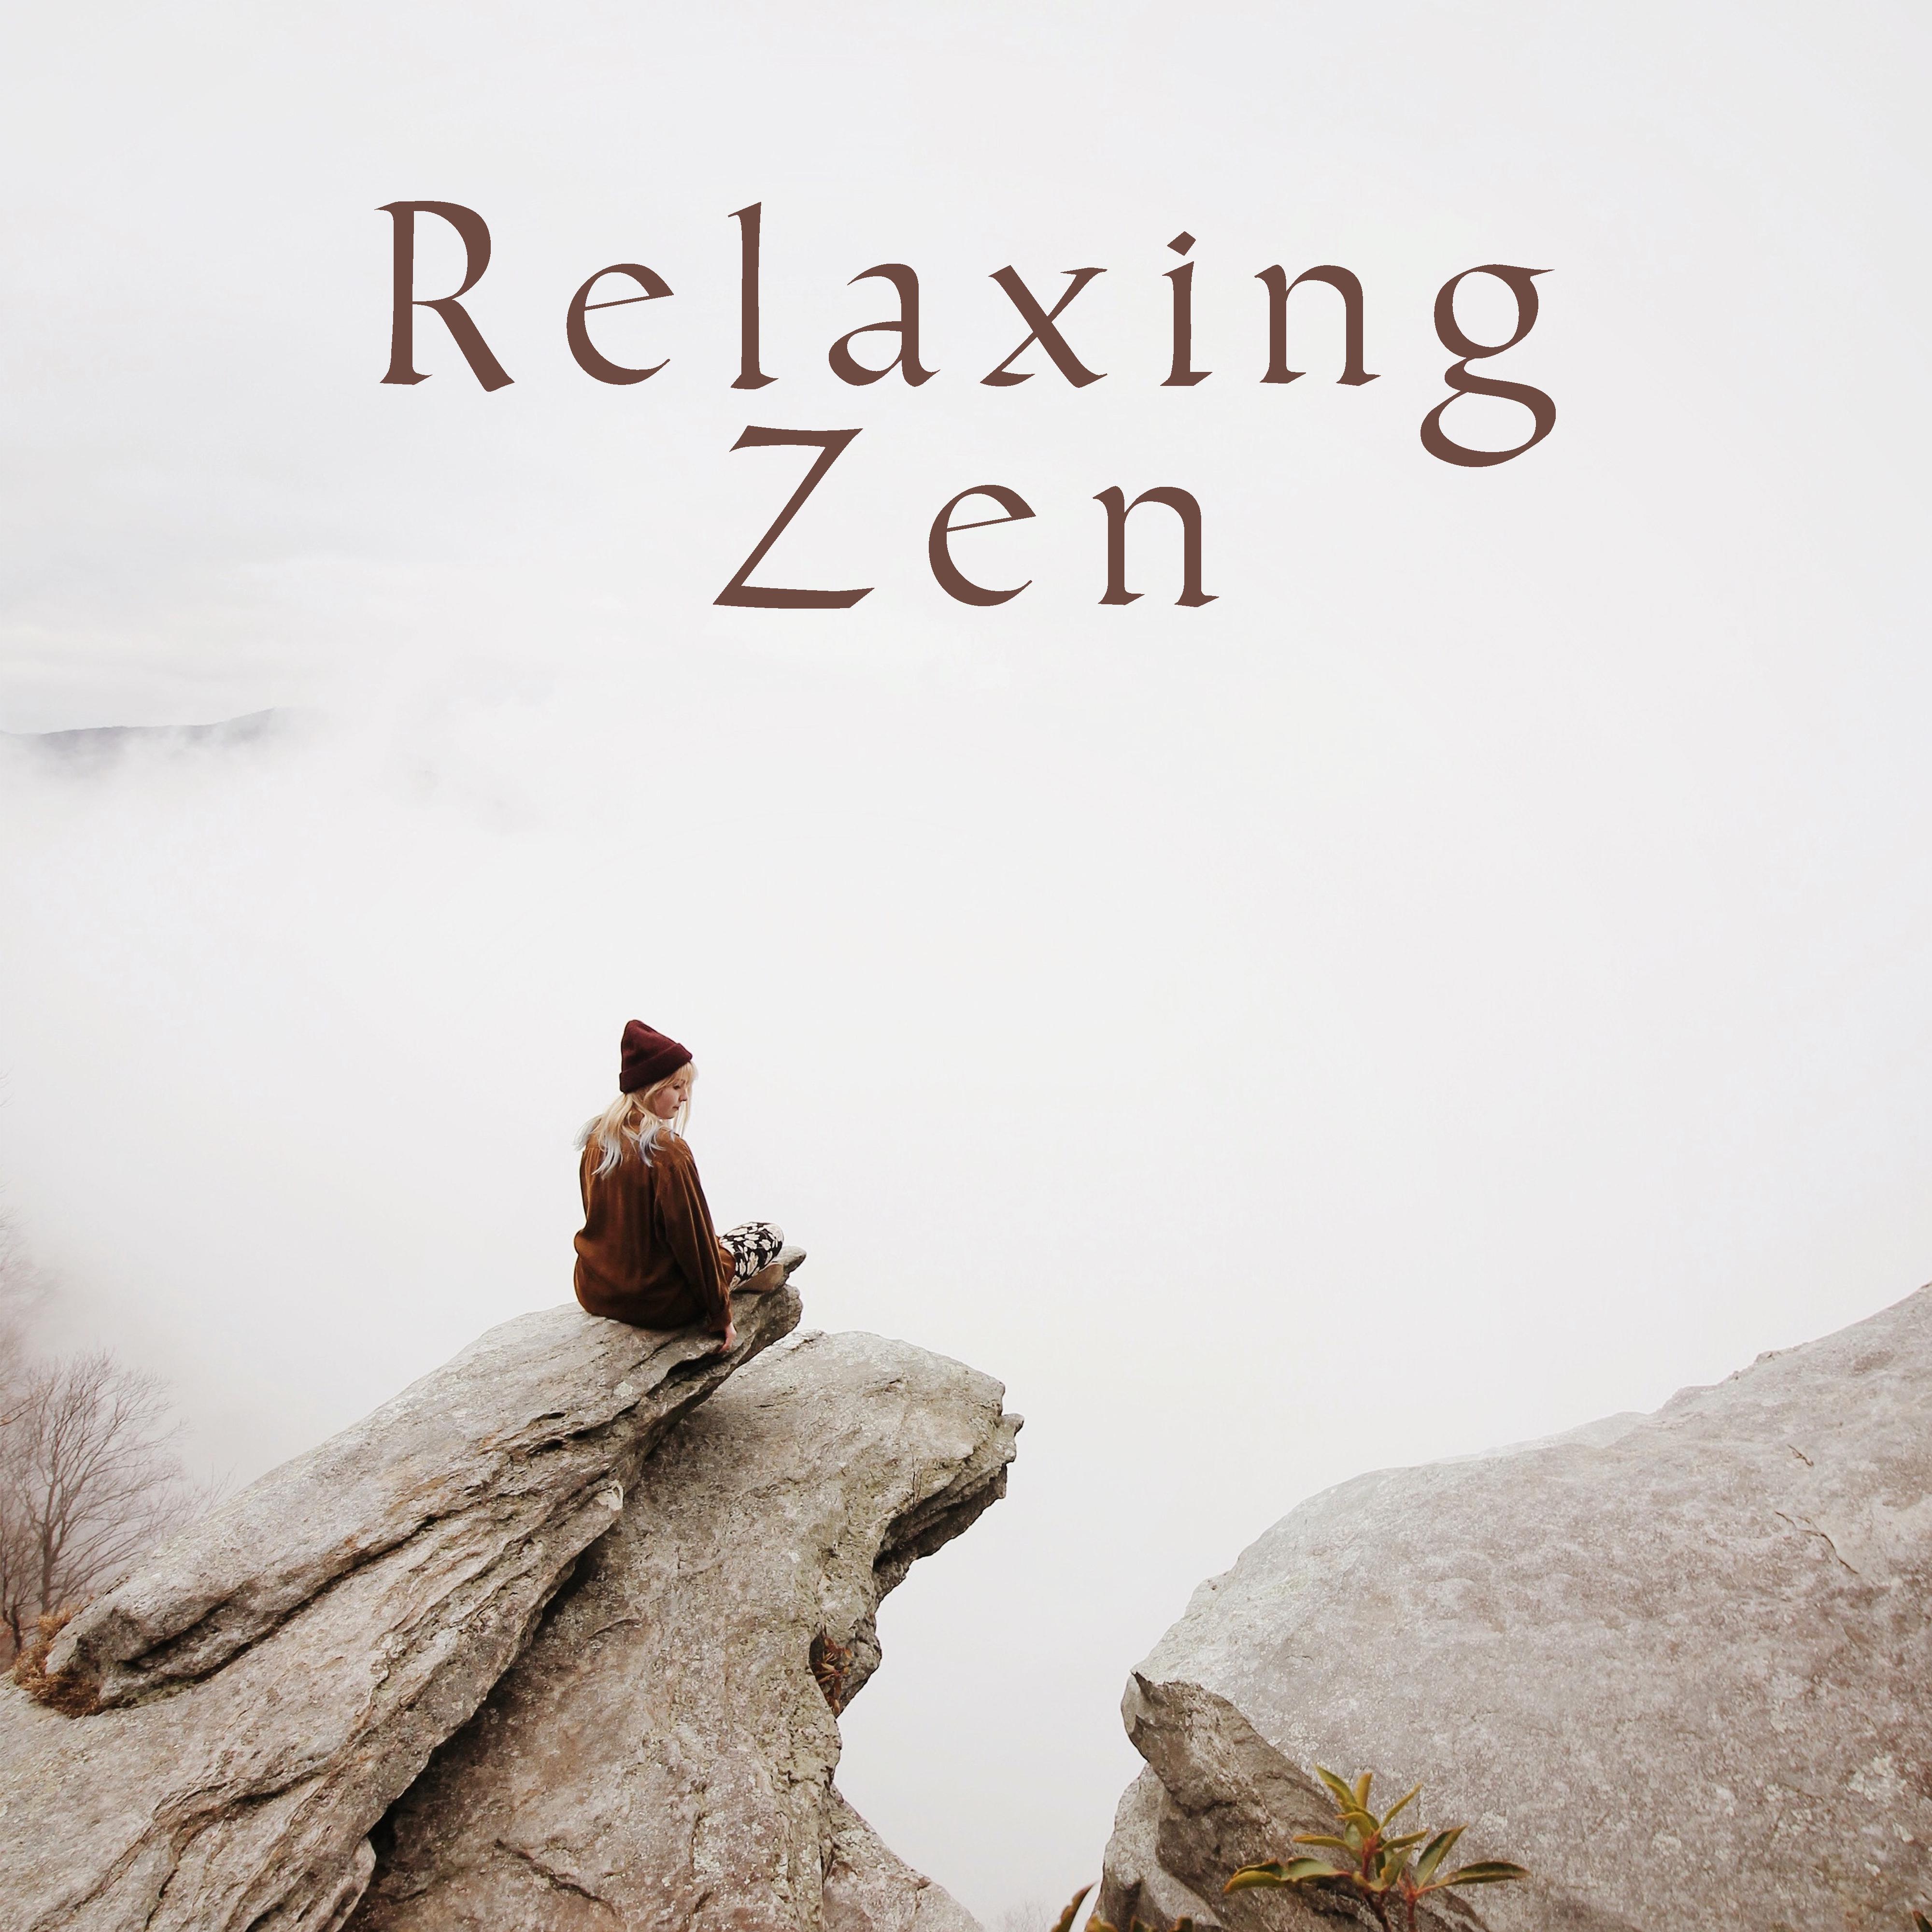 Relaxing Zen – Soothing Nature Sounds to Rest, New Age Music, Calm Down, Tranquil Sleep, Good Energy